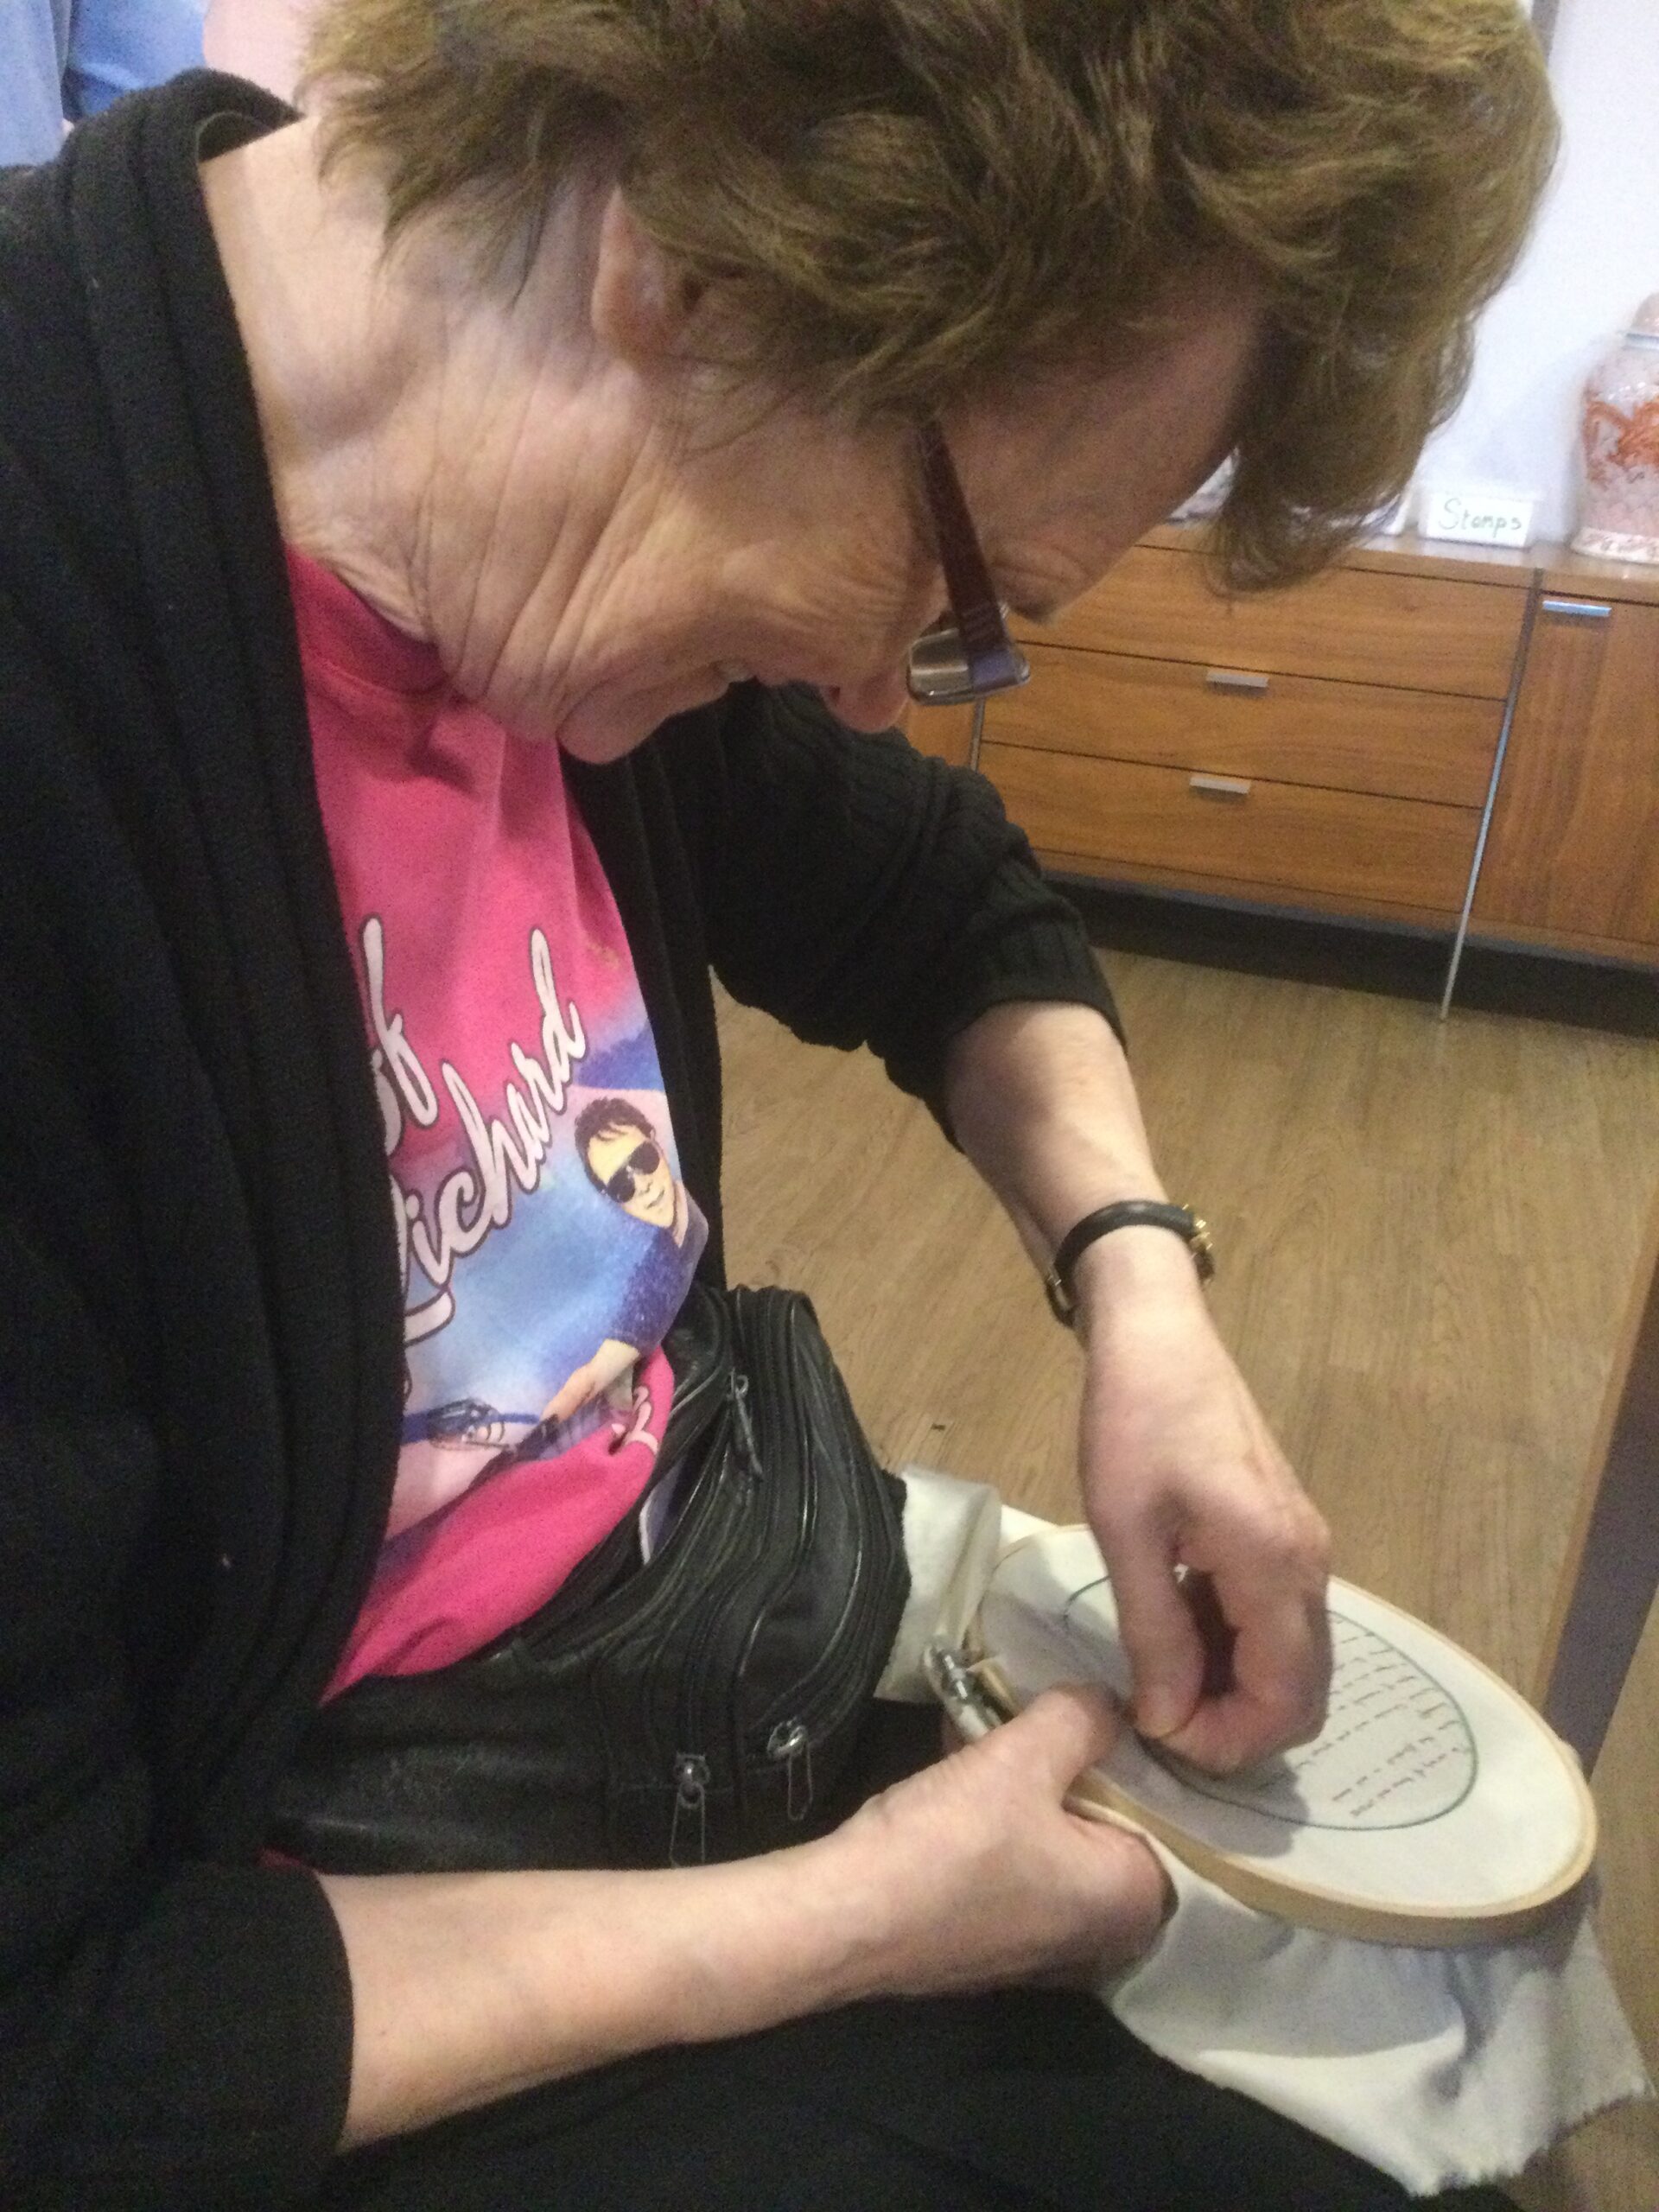 A woman wearing a black cardigan sits, stitching a piece of embroidery